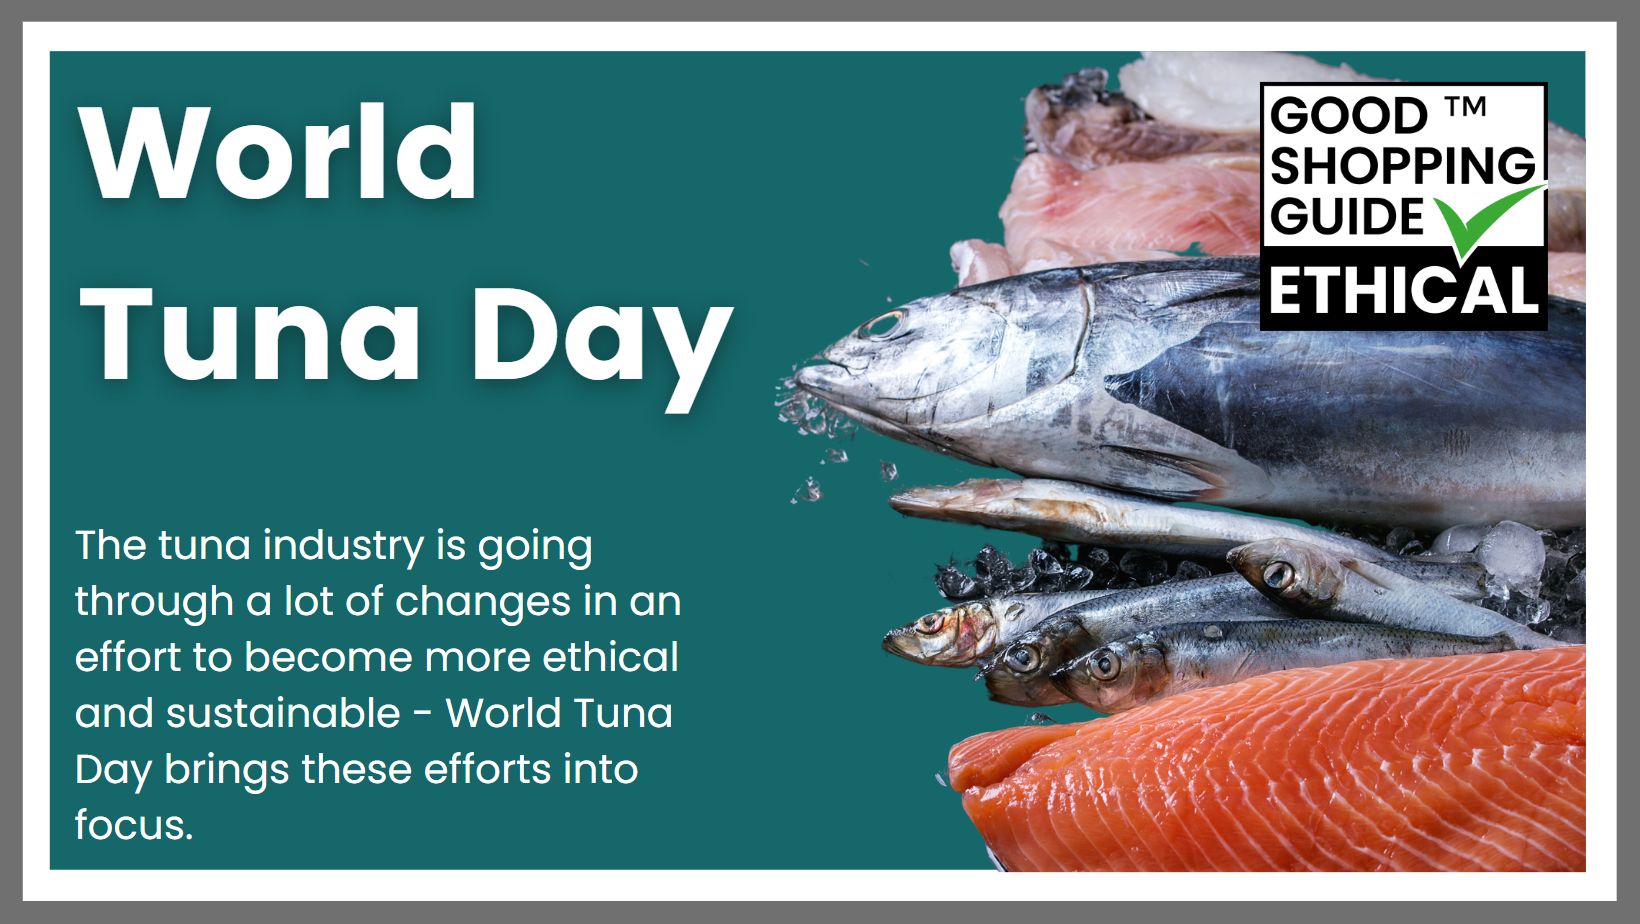 It's World Tuna Day! The UN event aims to promote sustainable management of  tuna populations and ethical fishing methods. - The Good Shopping Guide